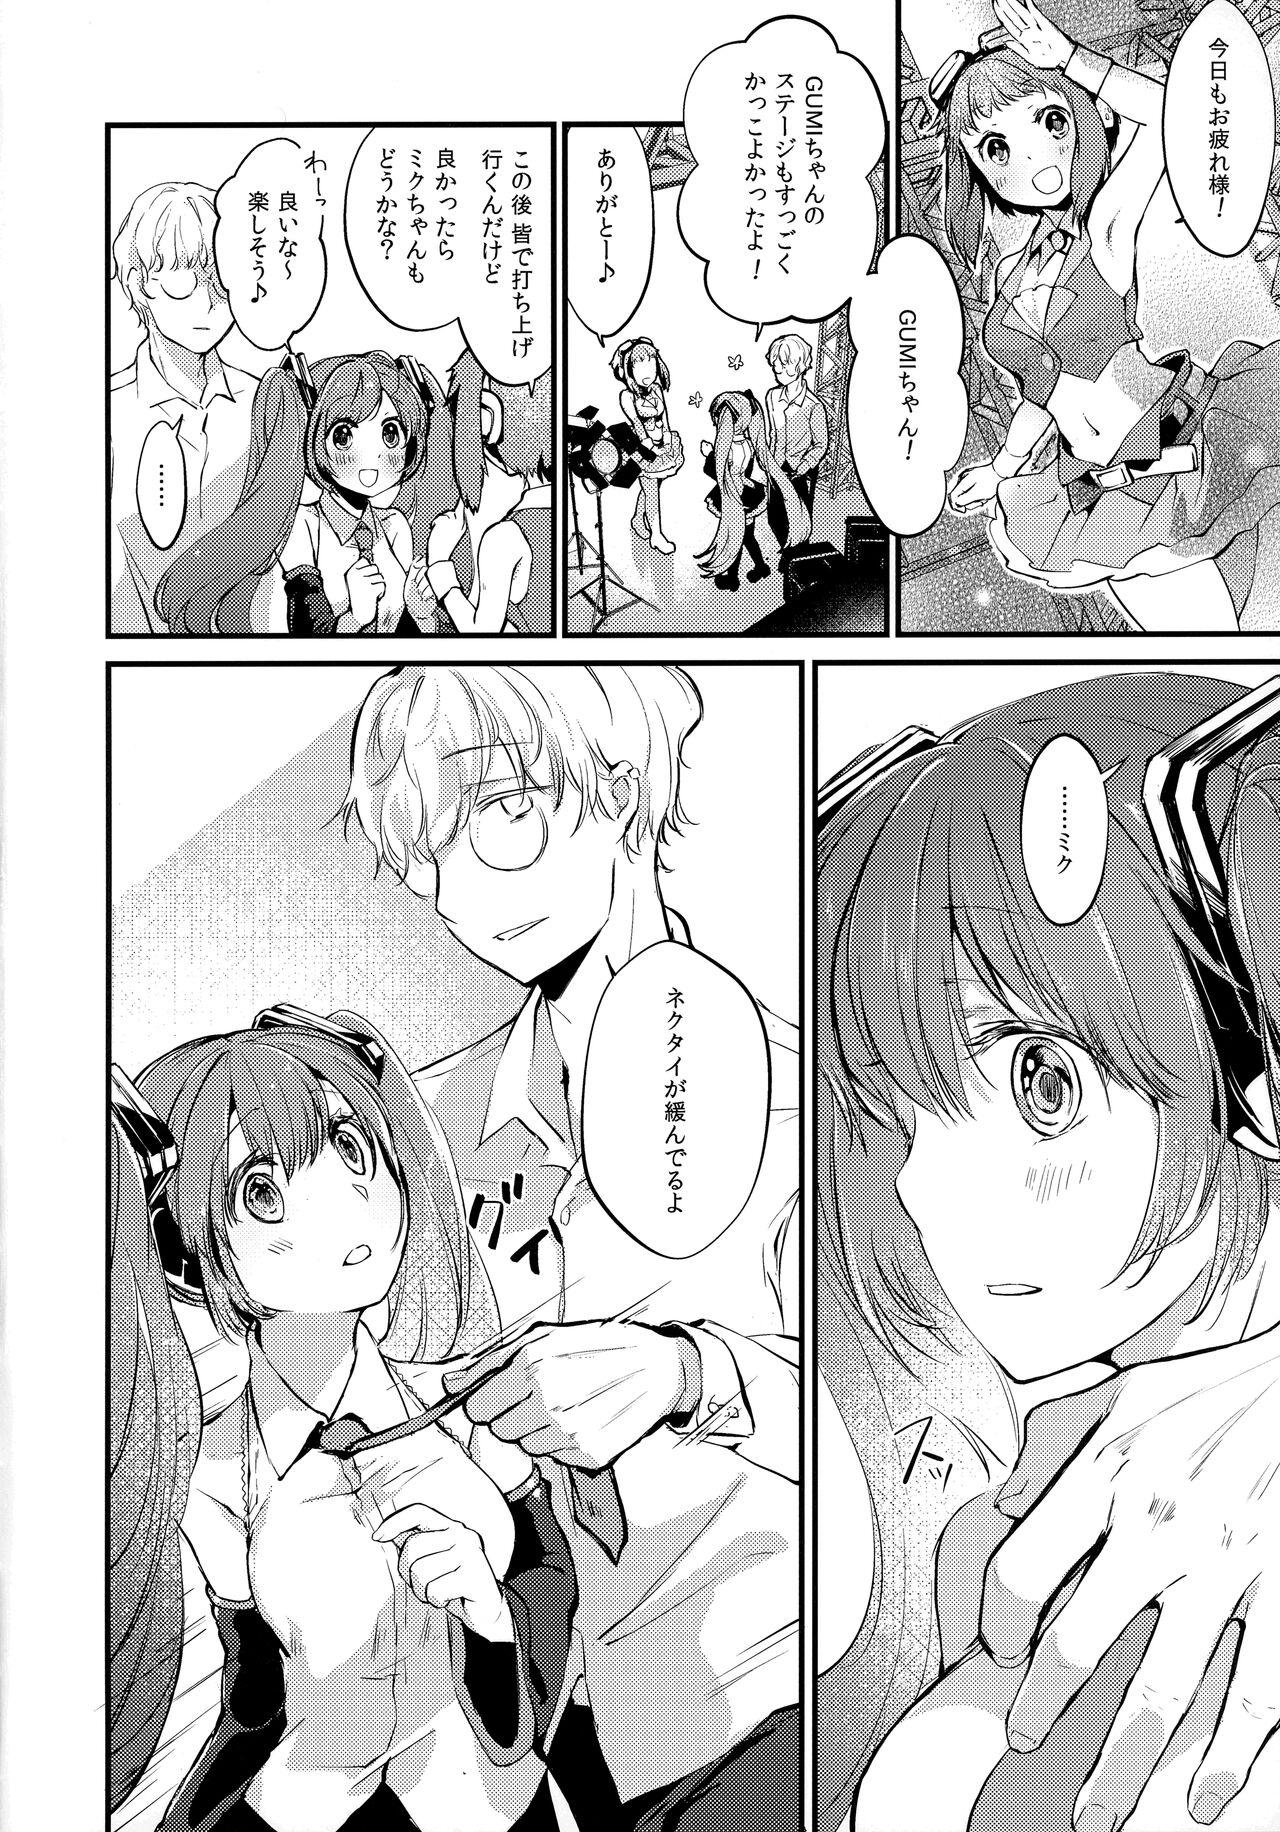 Erotic LOVEROID - Vocaloid Smooth - Page 5